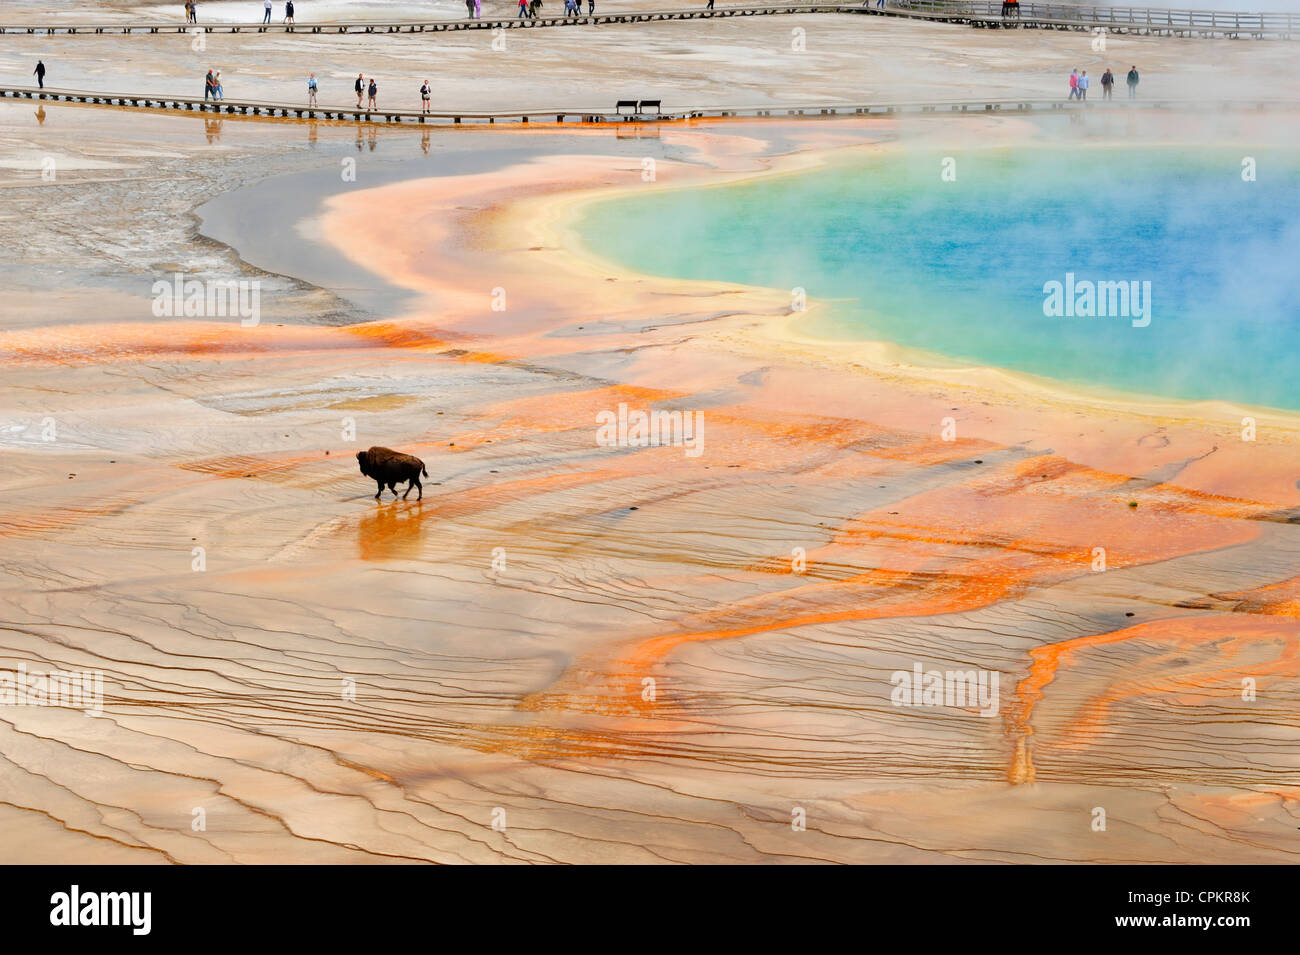 American bison (Bison bison) Walking near Grand Prismatic Spring outflow, Yellowstone National Park, Wyoming, USA Stock Photo